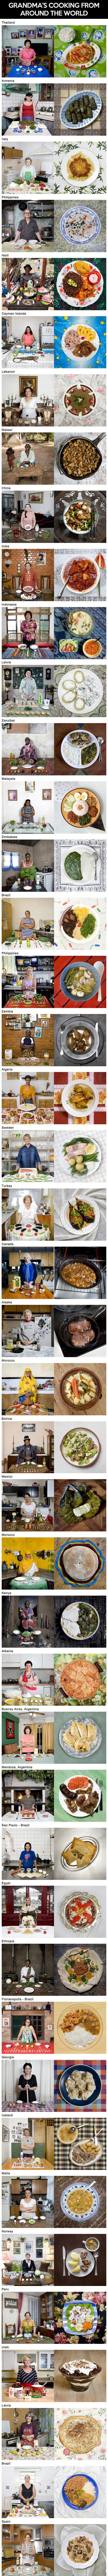 Grandma’s Cooking In Different Parts Of The World